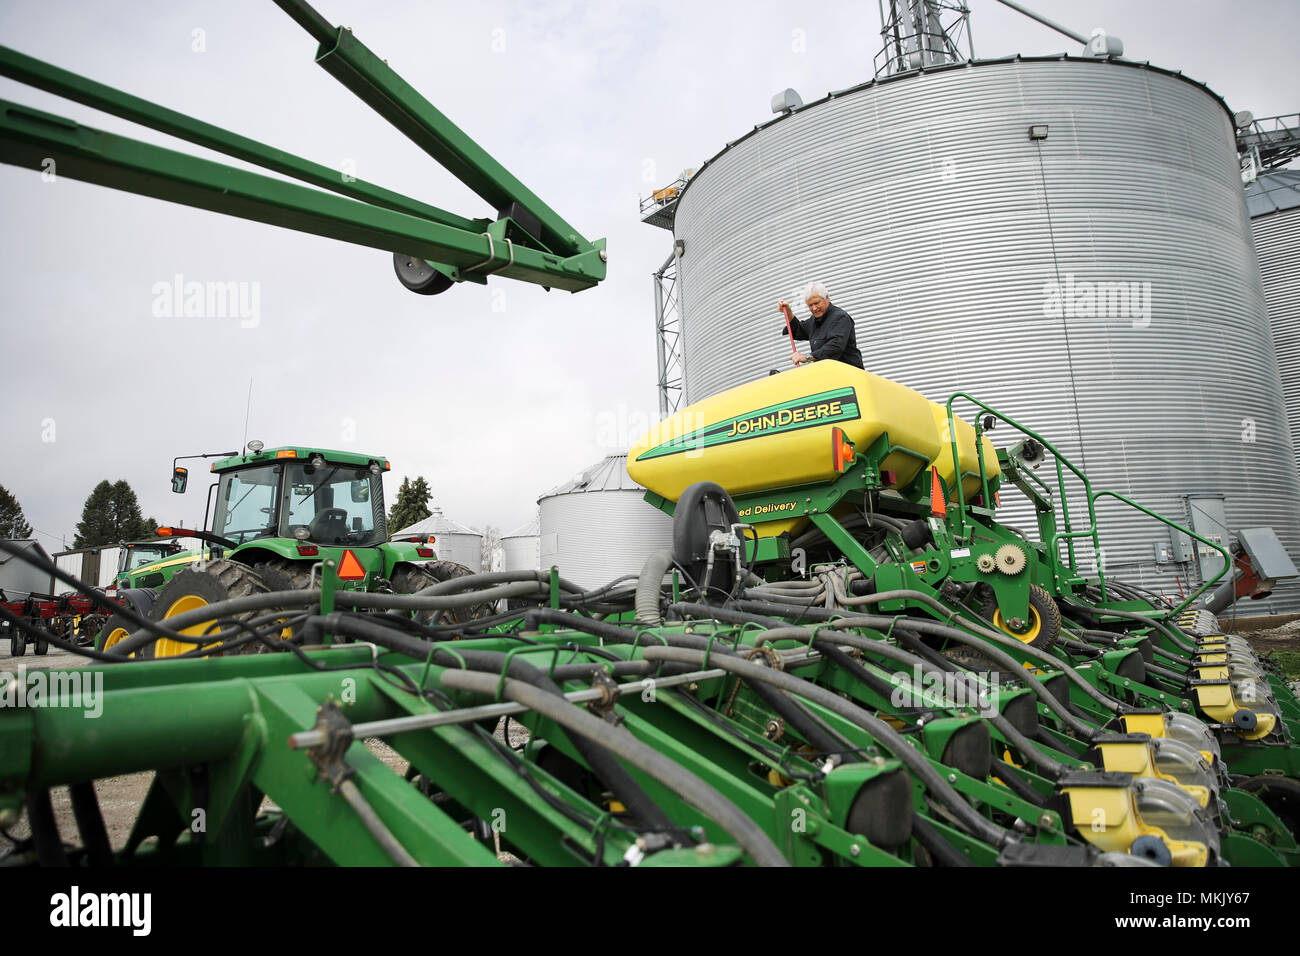 (180509) -- IOWA, May 9, 2018 (Xinhua) -- Rick Kimberley checks a farming combine machine at his farm near Des Moines, capital of Iowa State, May 3, 2018. Rick and his son, Grant, grow more than 4,000 acres of corn and soybeans with a couple of hired hands and massive combines whose computers precisely track yield, moisture and other key statistics for each row and acre. He has been to China 15 times in recent years to talk about precision farming and other tricks of his trade, becoming an ambassador for modern farming methods in China. As for the current trade tensions between the United Stat Stock Photo